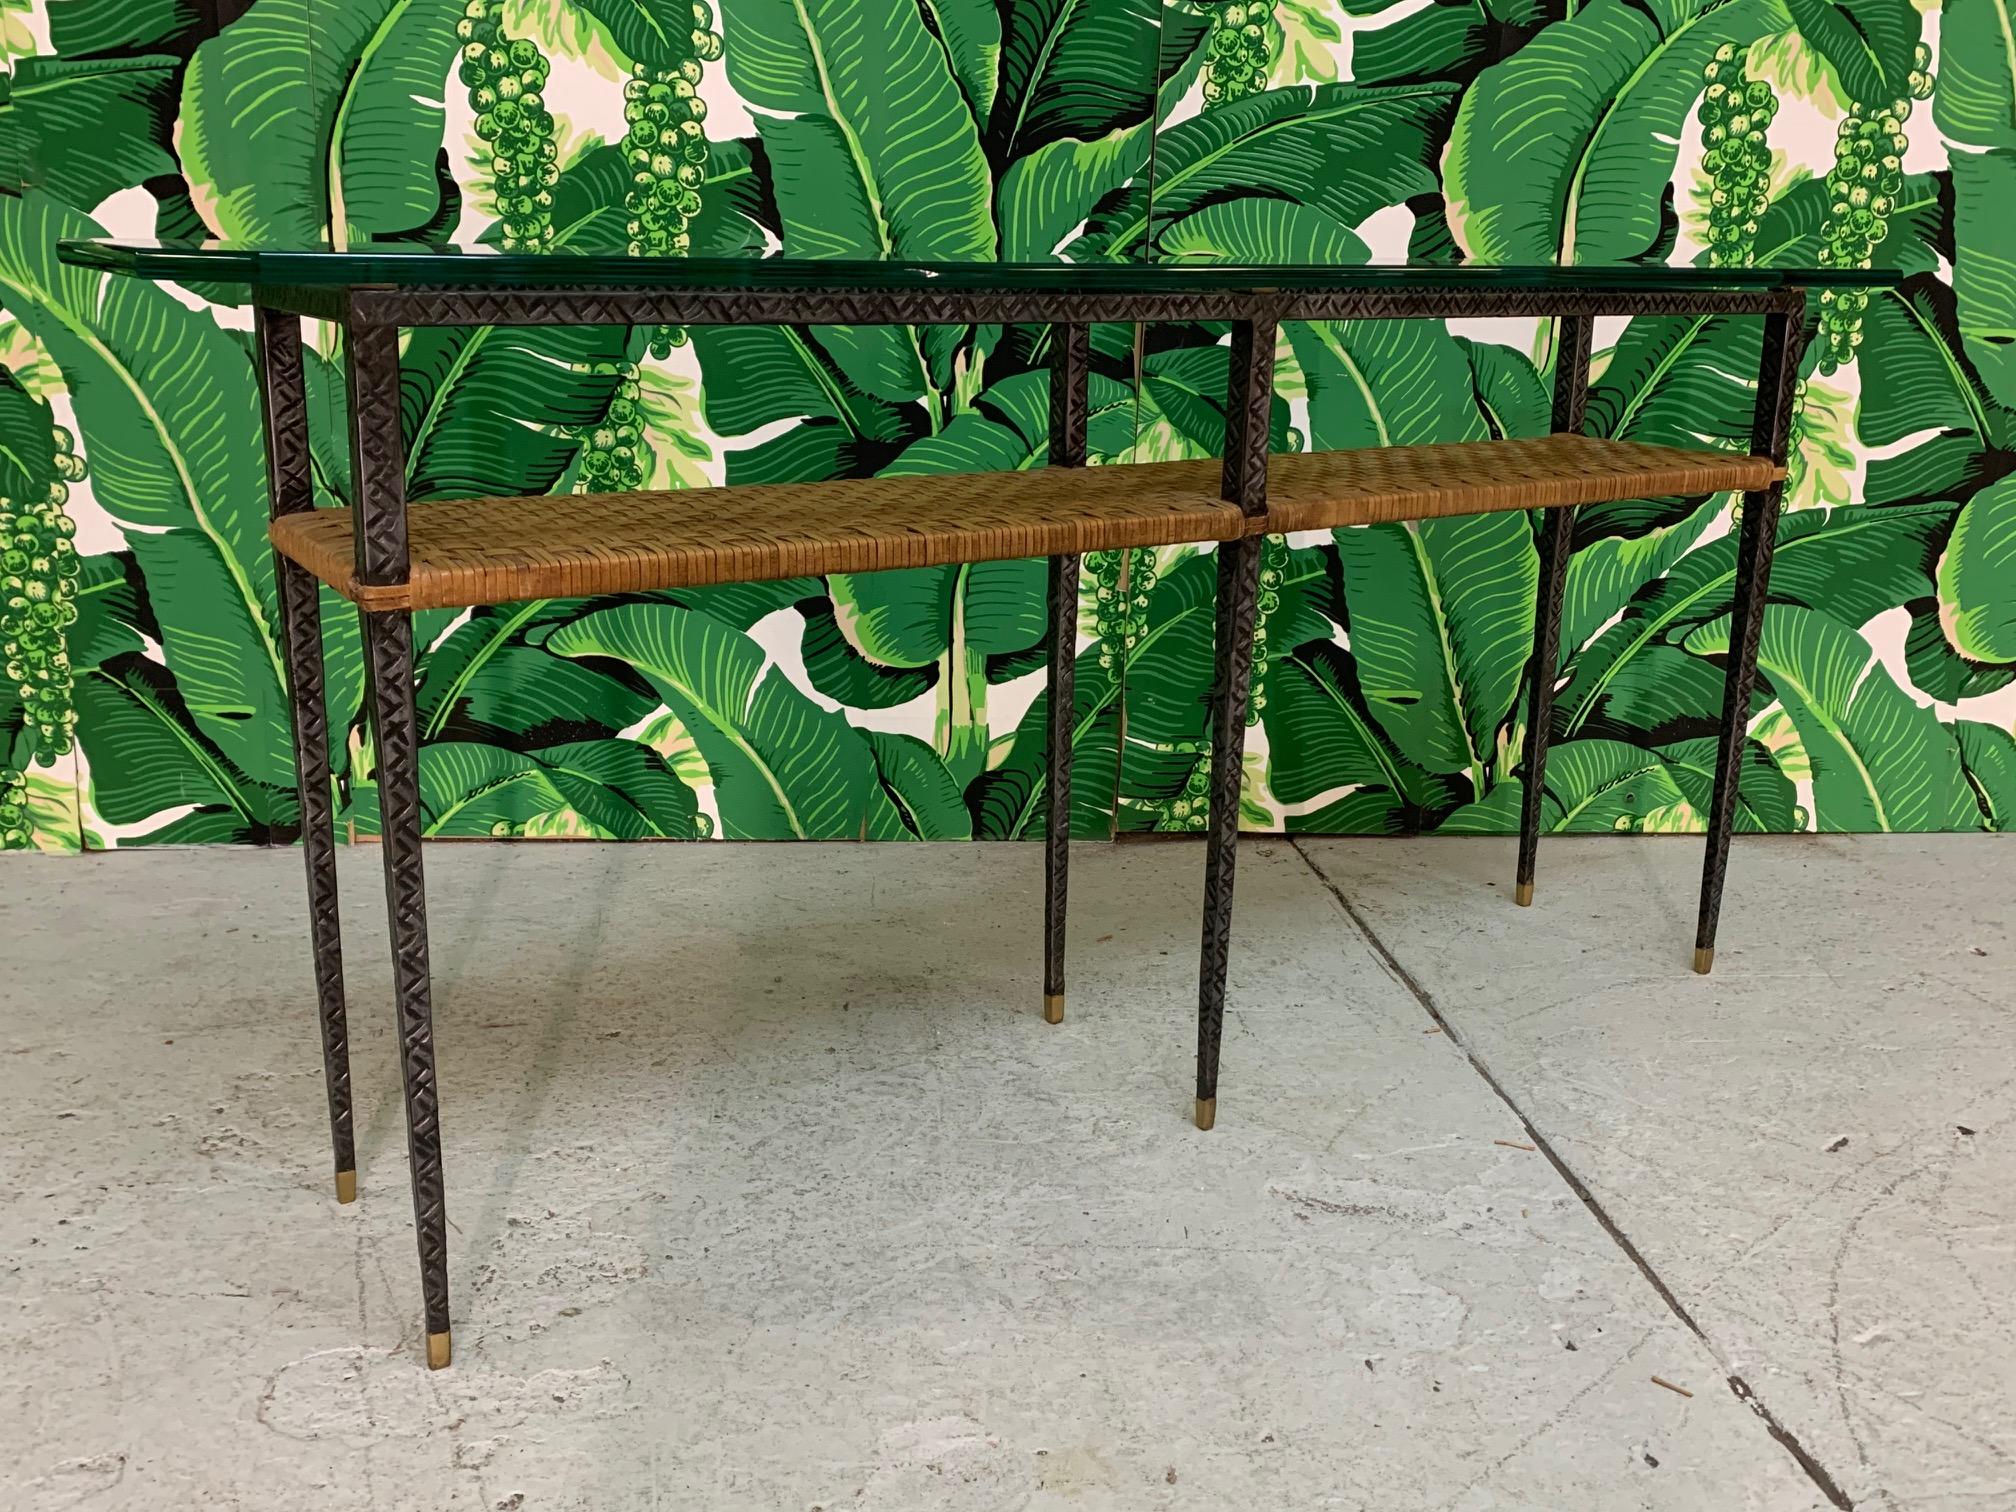 Mixed-media console table features a metal frame with diamond cut detailing, brass accents, rattan center shelf, and a glass top. Very good condition with only very minor imperfections consistent with age. Glass top measures 60